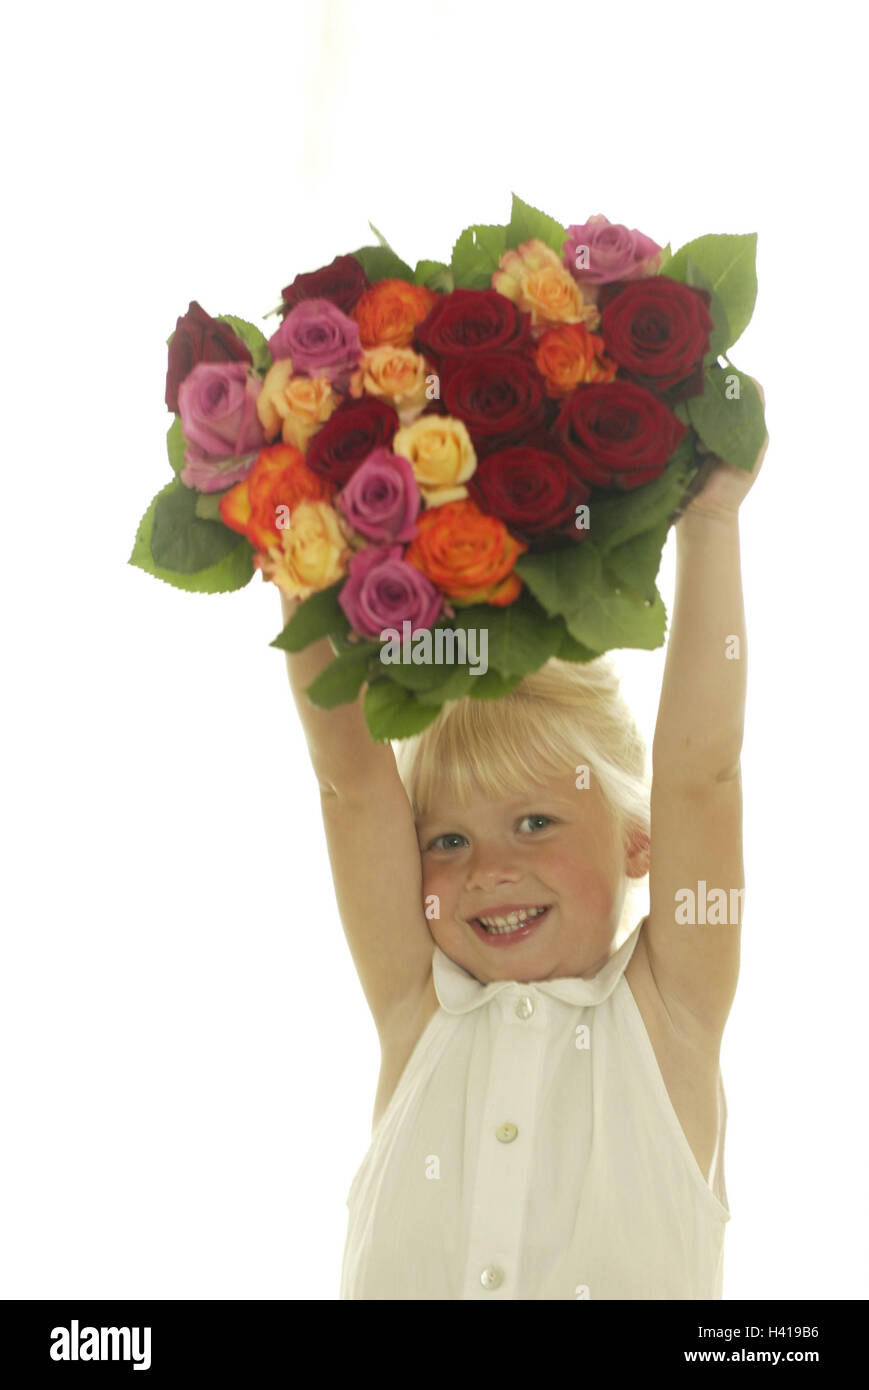 Girls, cheerfully, rose bouquet,  holds up, portrait  Series, child portrait, child, 5 - 10 years, blond, smiles, gives happily, joy, gives, mother day, Valentine's day, birthday, bouquet, heart-shaped, flower bouquet, roses, blooms, colors, differently, indoors, studio, free plates Stock Photo